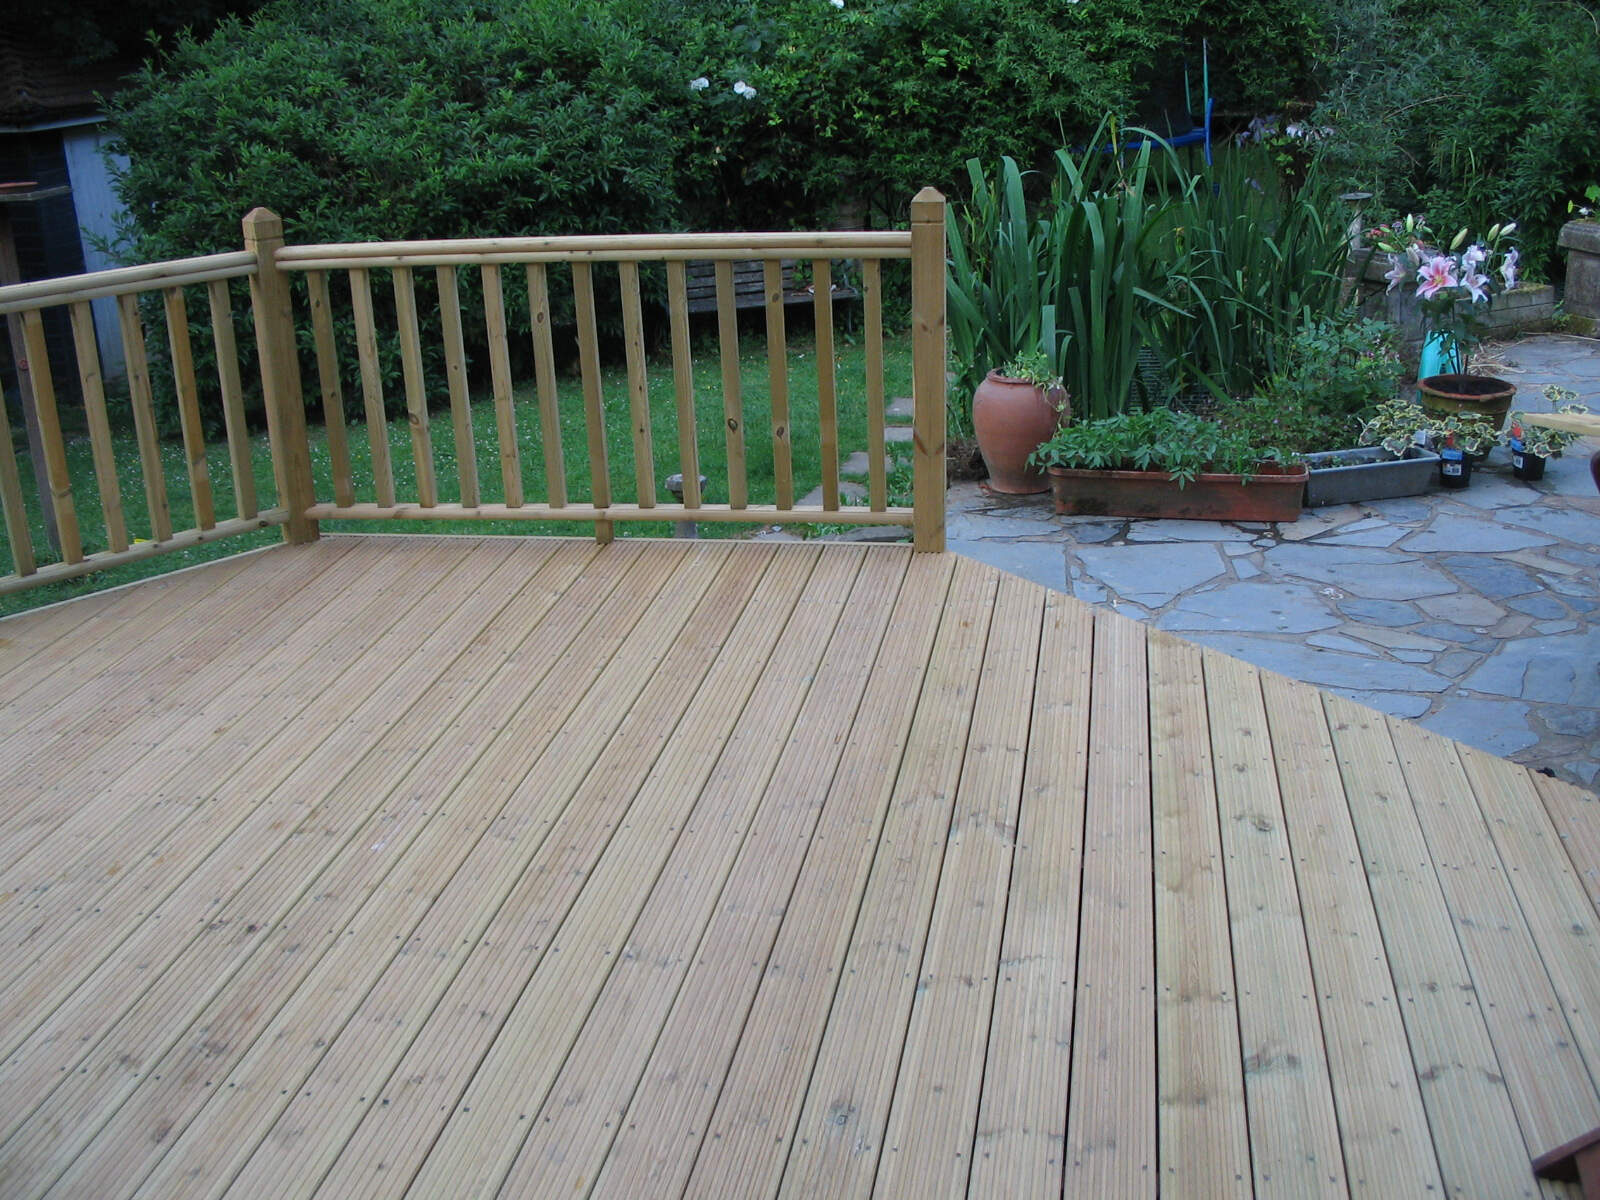 Construction of a decking area with railings